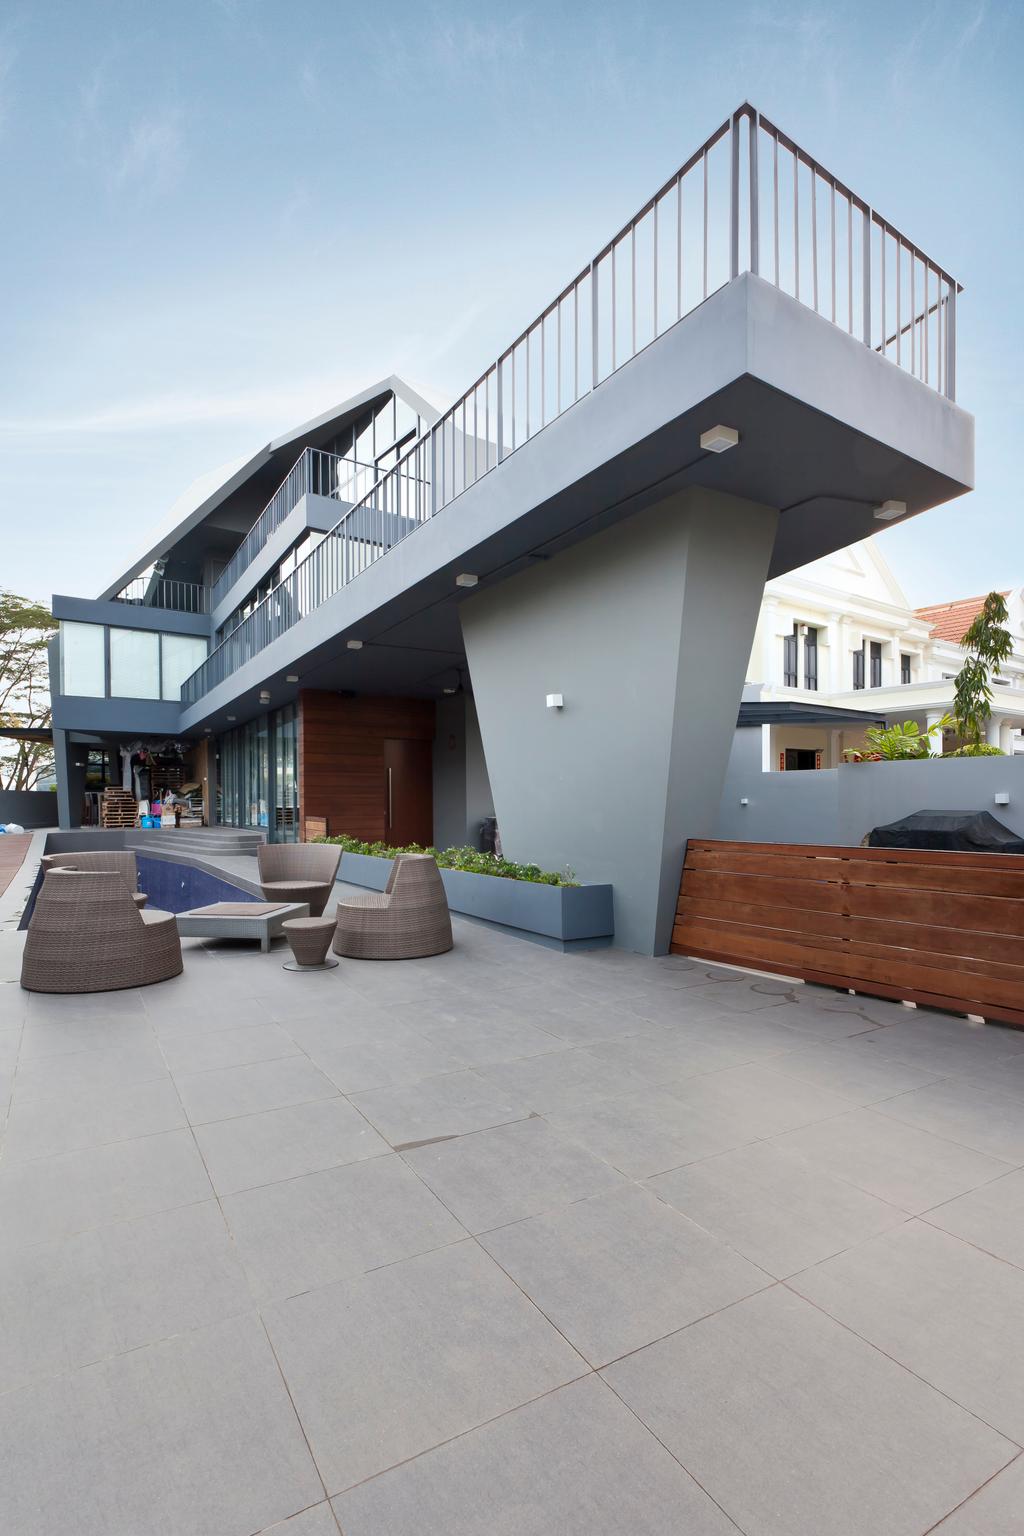 Contemporary, Landed, Balcony, S House, Architect, Czarl Architects, Upper Deck, Pool, Lounge Area, Tiles, Couch, Furniture, Bench